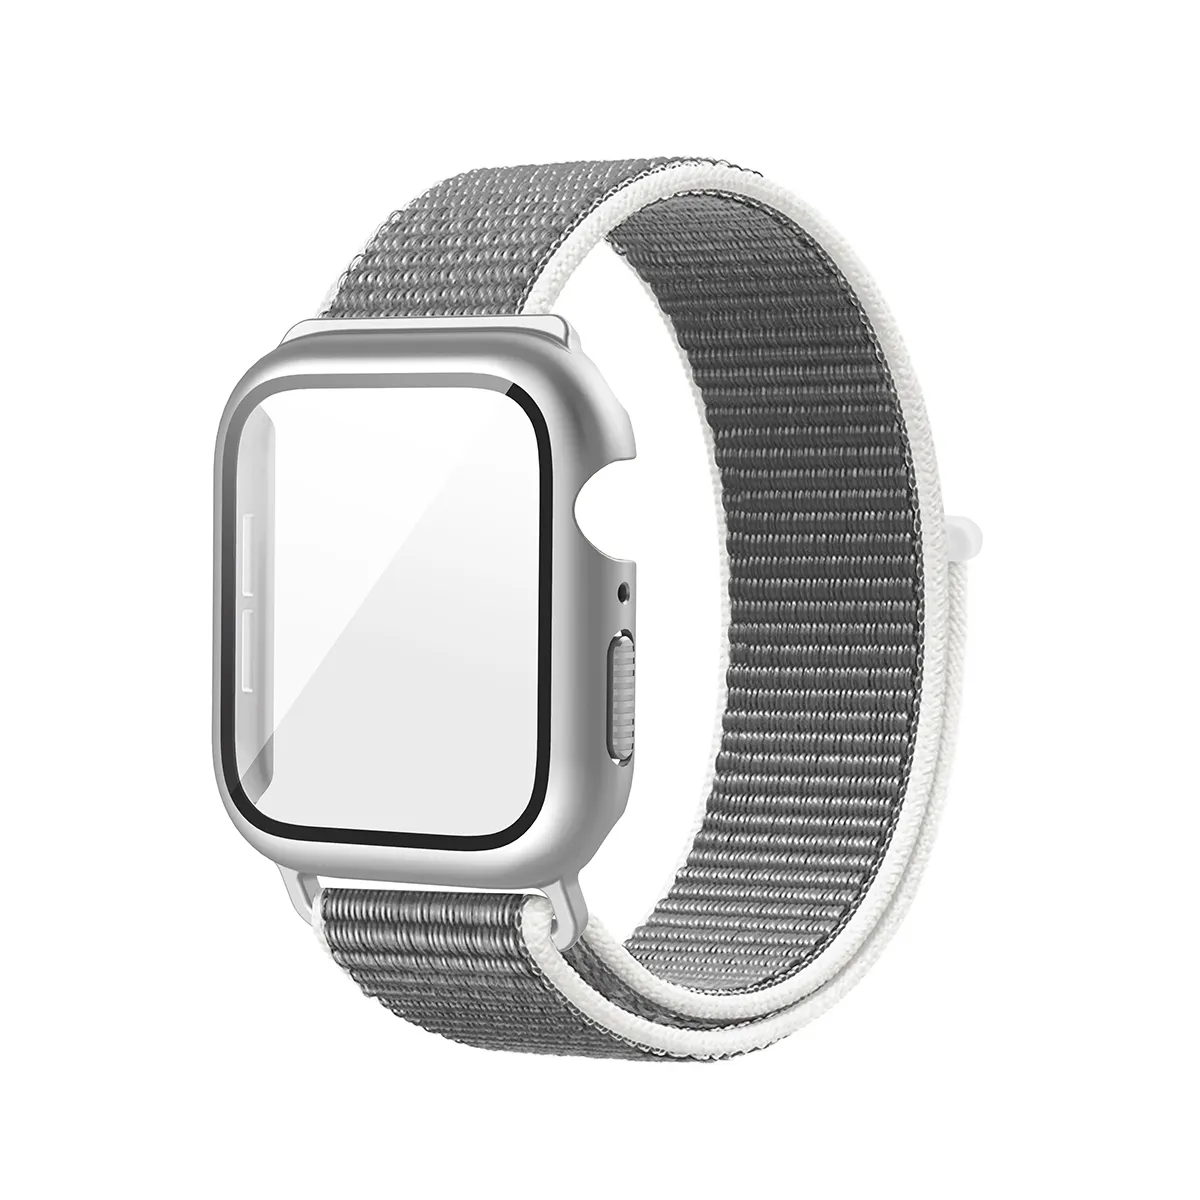 Nylon one-piece protective sleeve strap for iwatch band 44mm 40mm for iWatch Series4 5 6 se